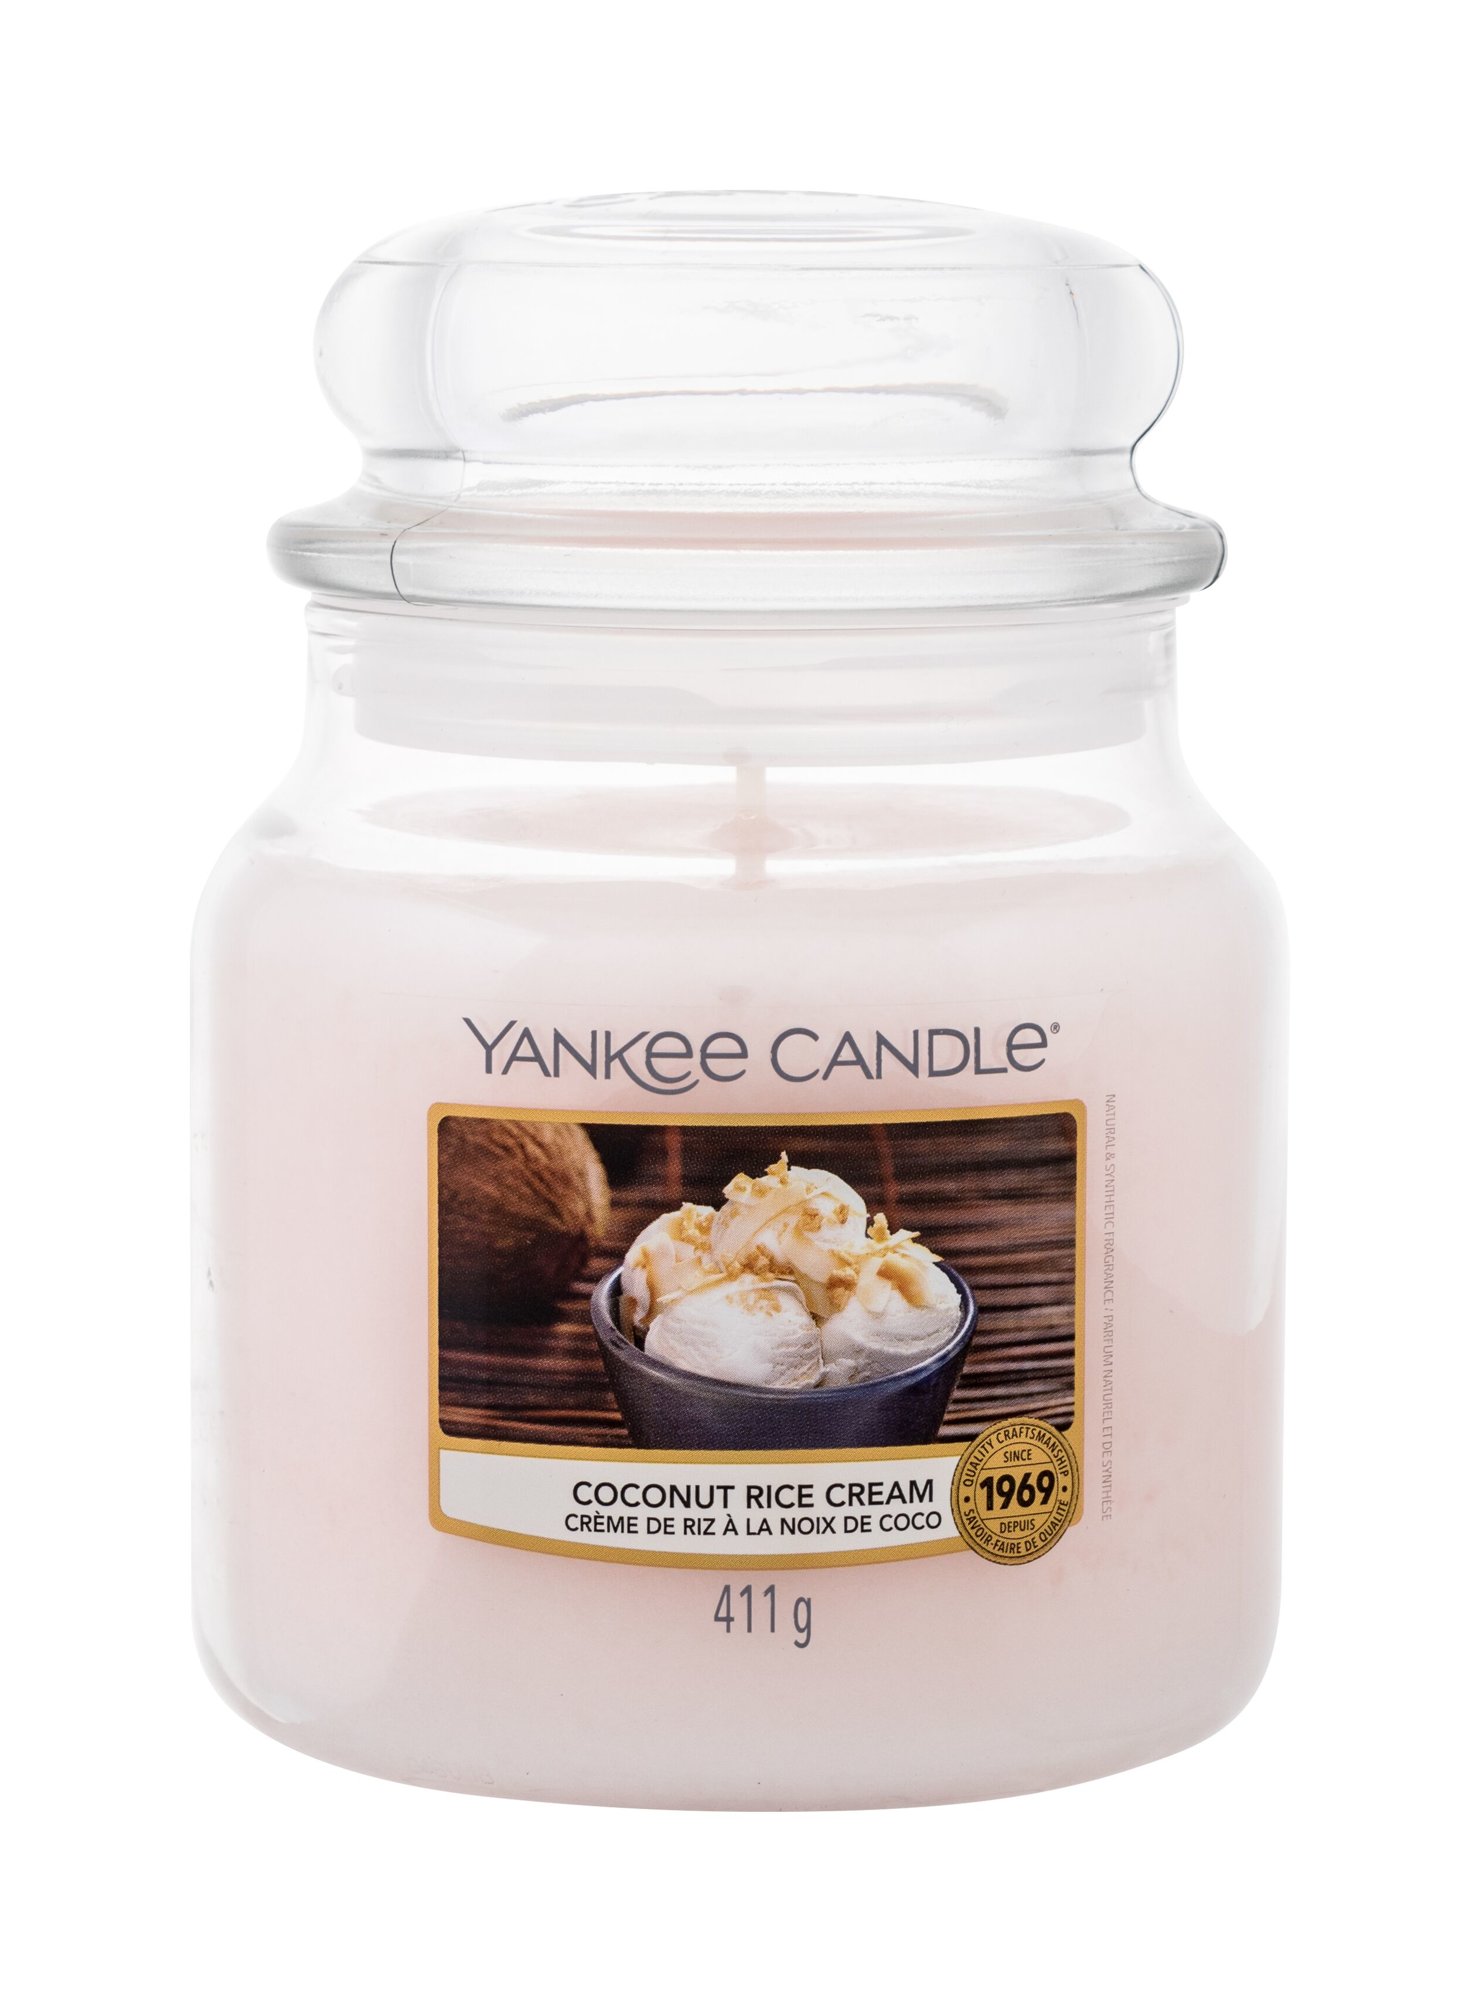 Yankee Candle Coconut Rice Cream 411g Kvepalai Unisex Scented Candle